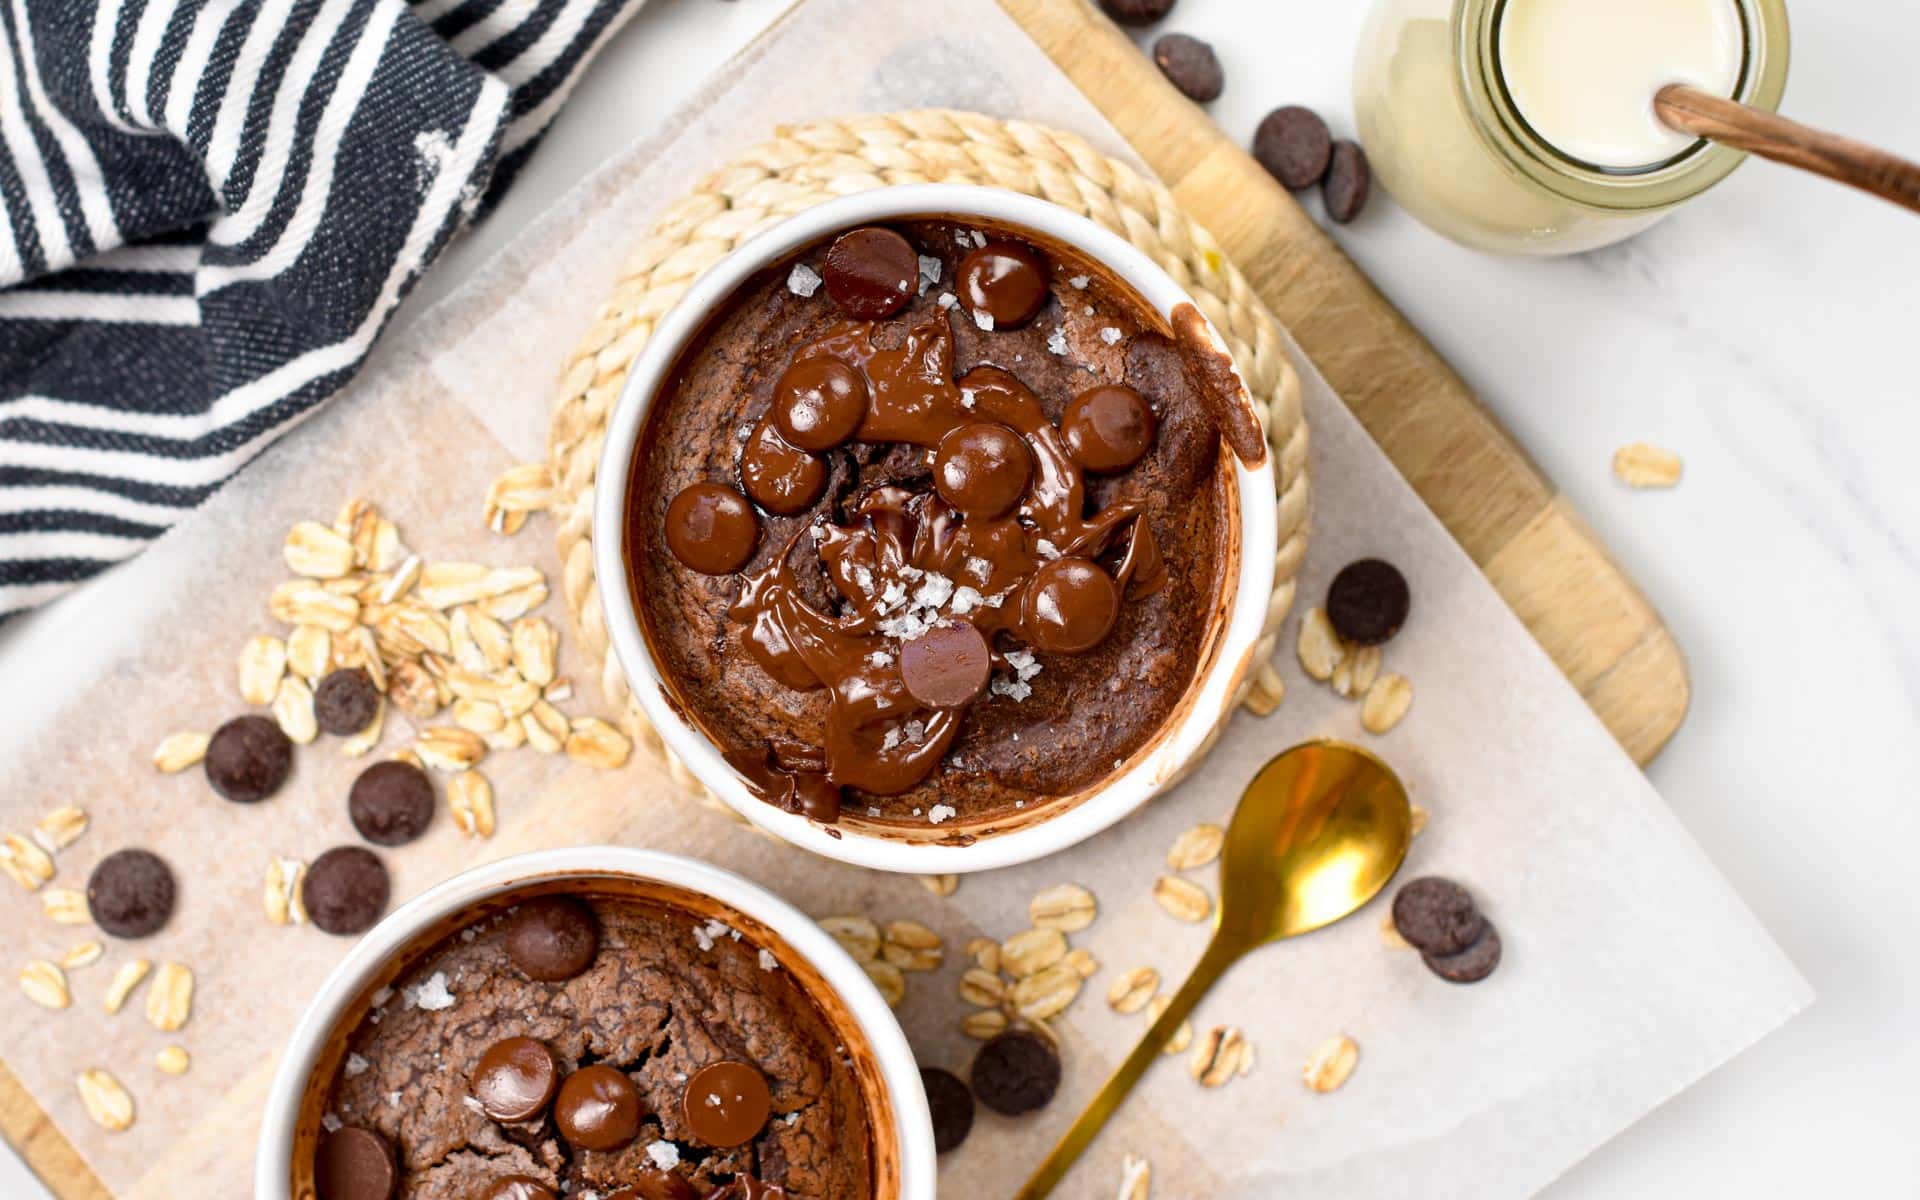 This Chocolate Baked Oats is an easy, healthy breakfast packed with 17grams protein, fiber and the most delicious chocolate flavors. Plus, this baked oats recipe is also dairy-free with gluten-free and vegan options.This Chocolate Baked Oats is an easy, healthy breakfast packed with 17grams protein, fiber and the most delicious chocolate flavors. Plus, this baked oats recipe is also dairy-free with gluten-free and vegan options.